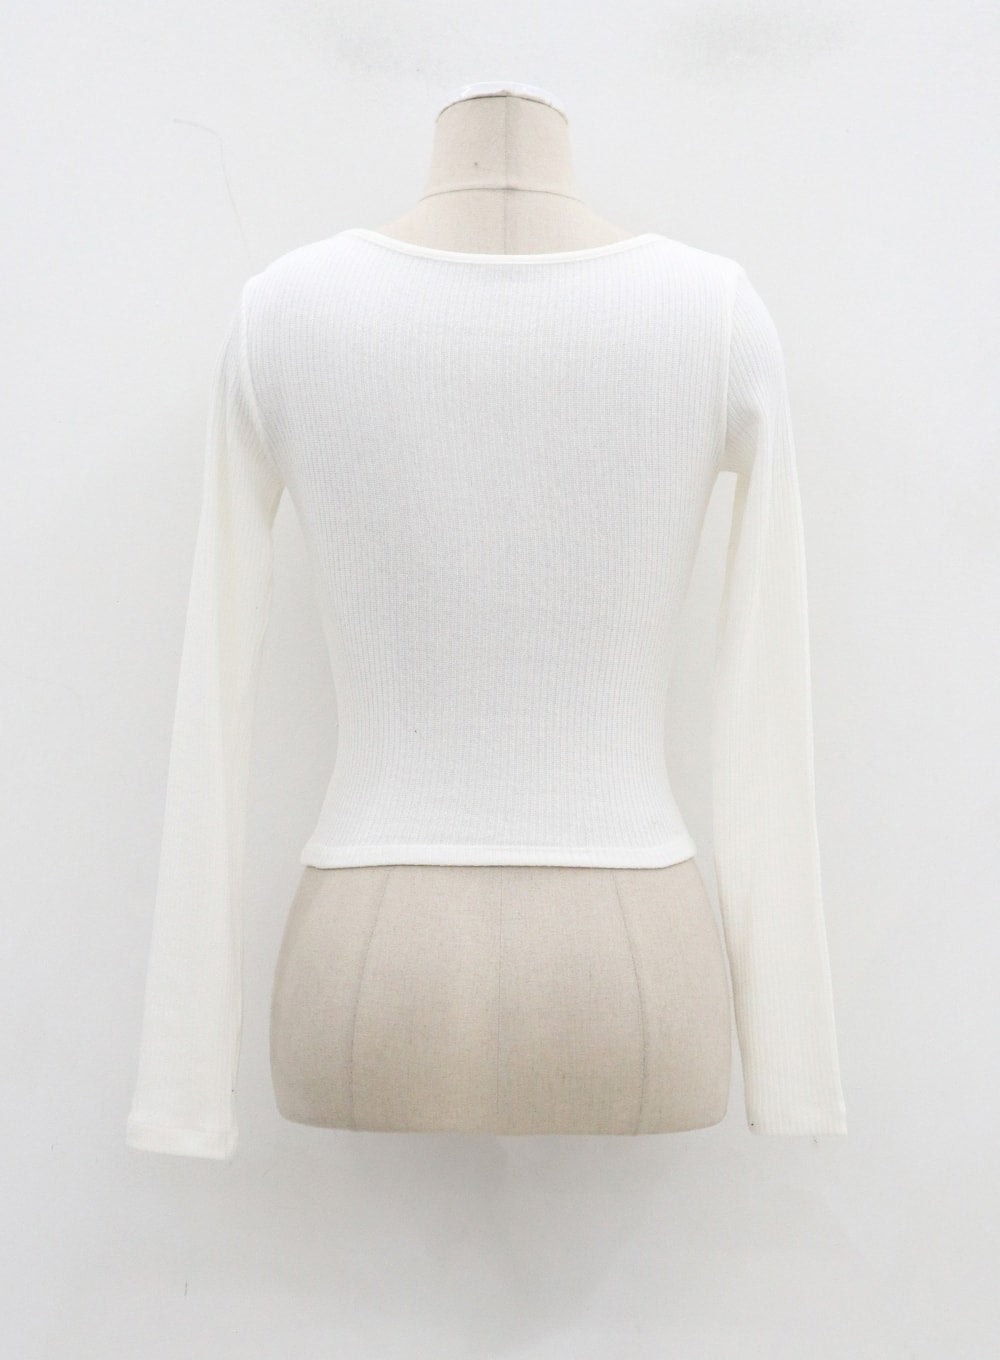 Square Neck Button Cropped Long Sleeve Top CJ325